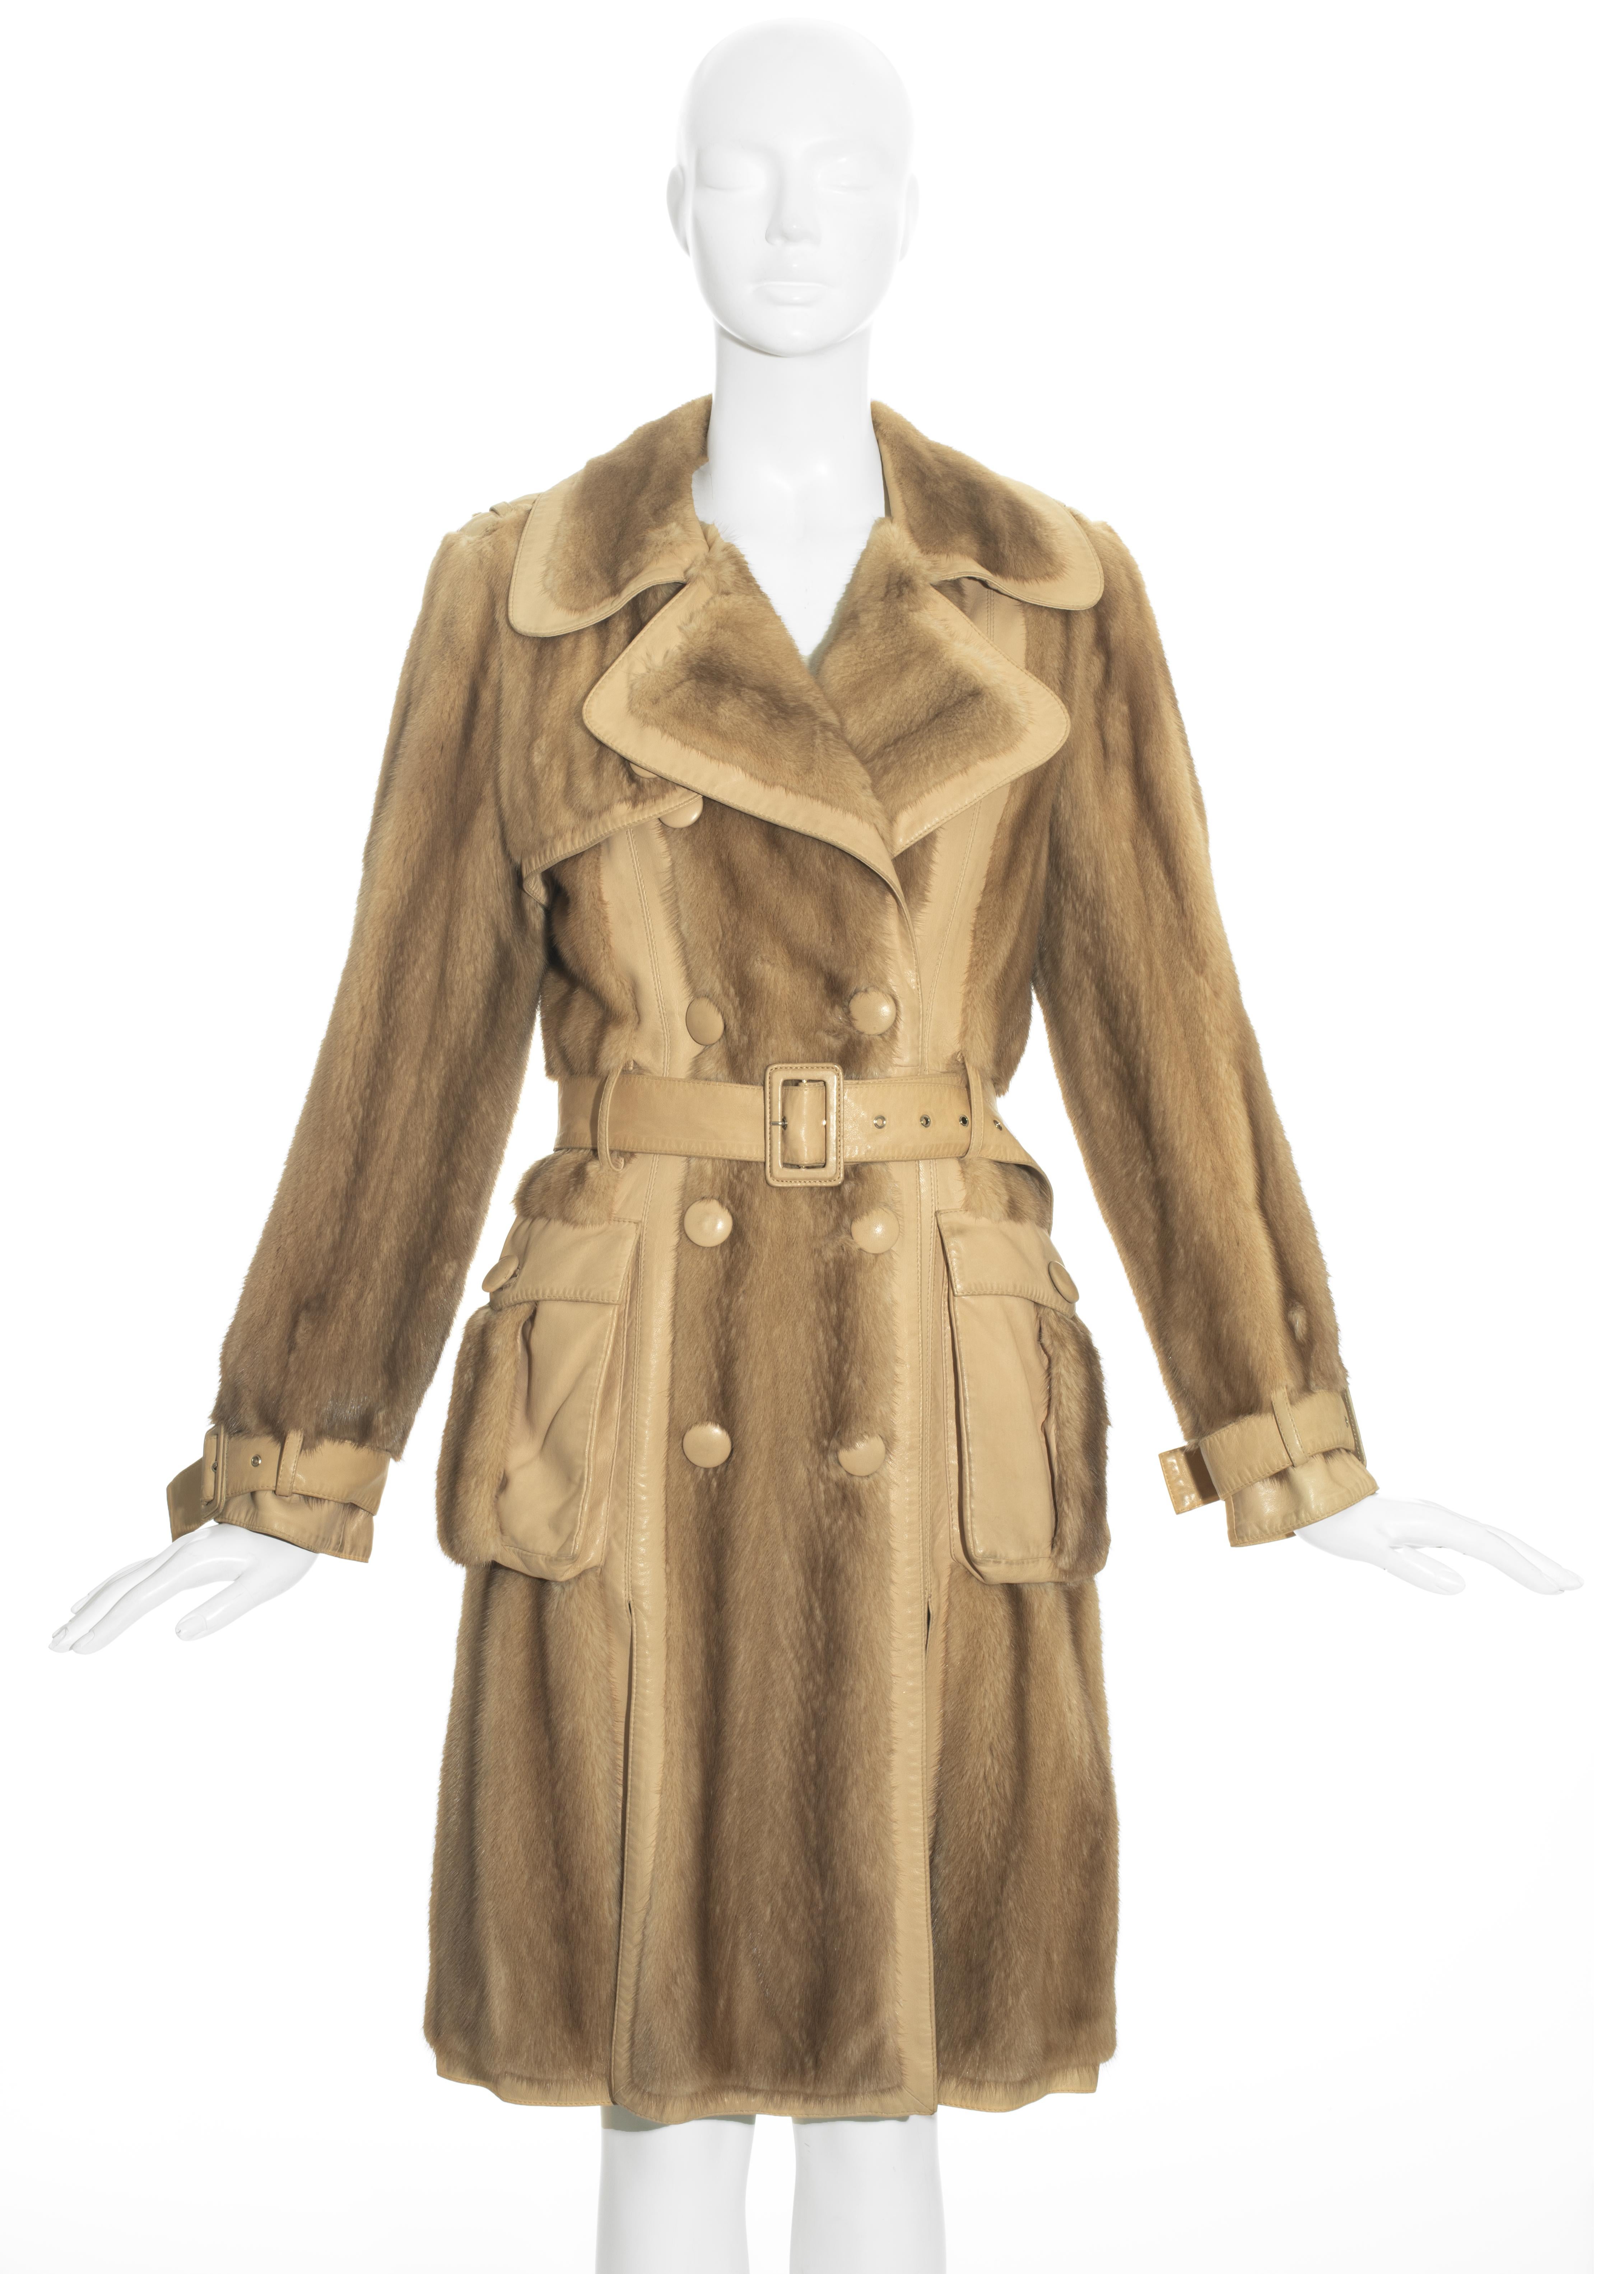 Christian Dior by John Galliano mink fur and lambskin leather trench coat with leather buckle fastenings on waist and wrists, silk lining and large leather buttons.

Fall-Winter 2005